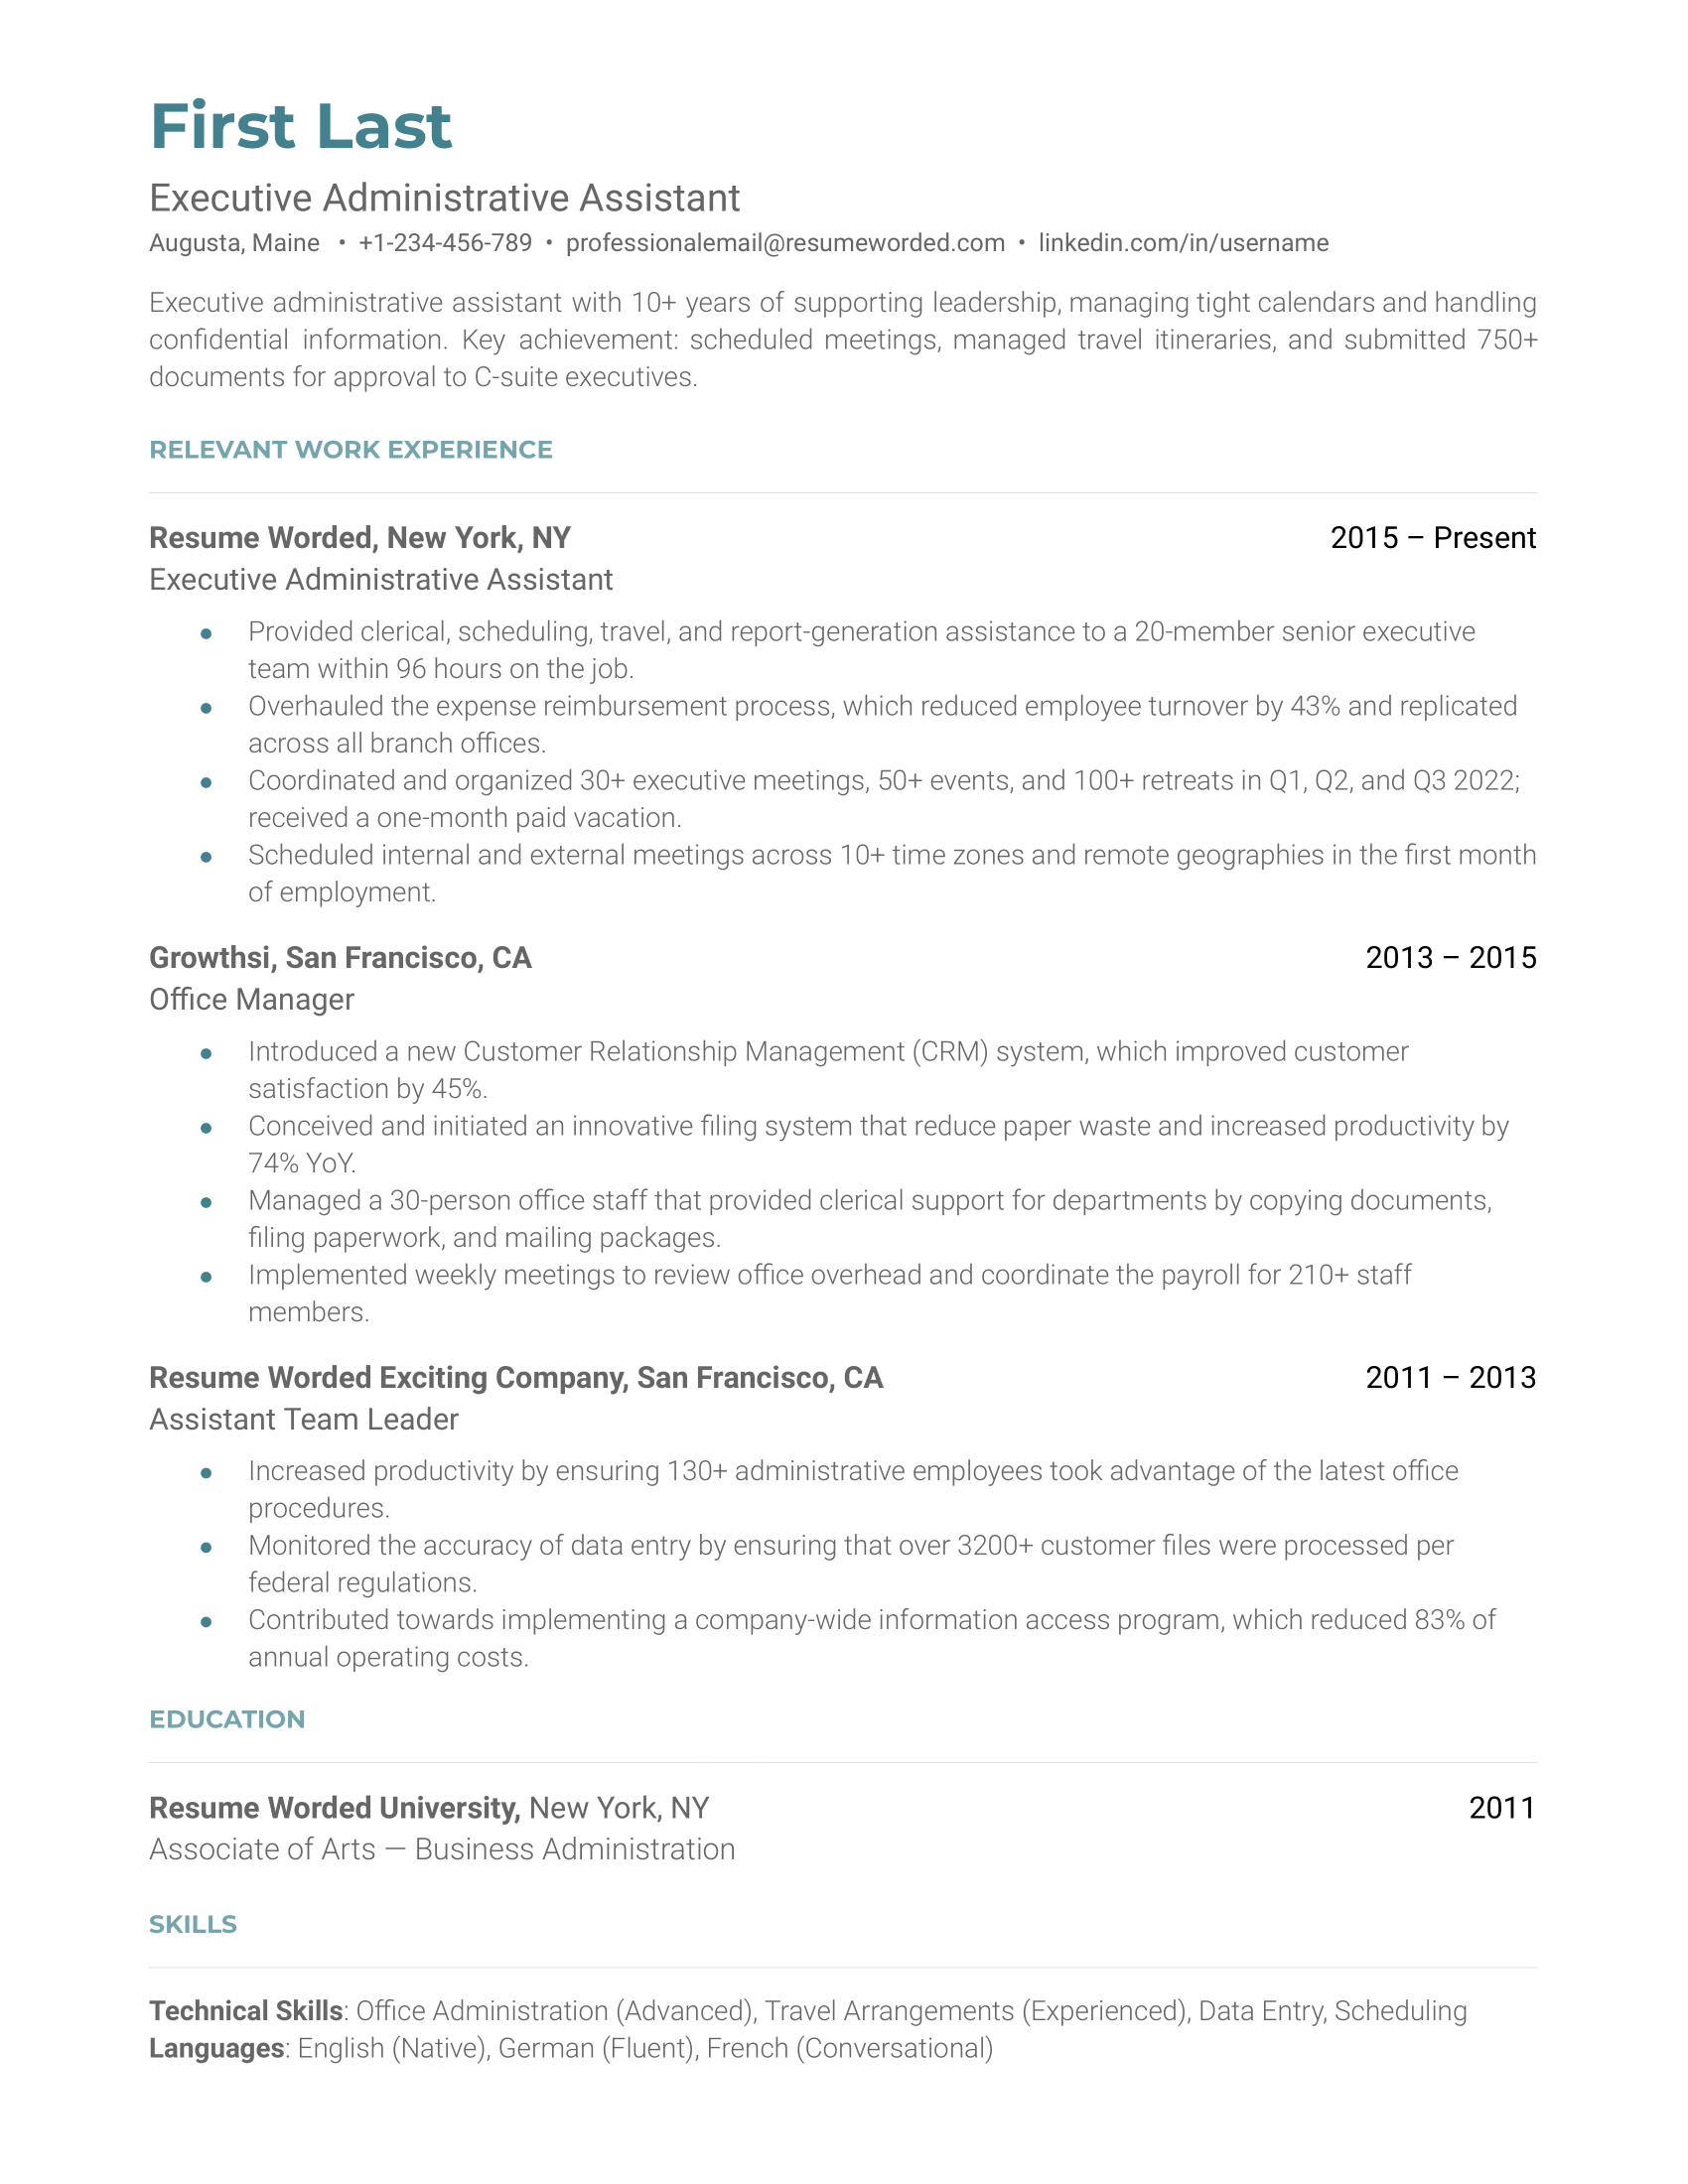 A resume for an executive administrative assistant with a bachelor's degree and experience as an adminstrative and executive assistant.